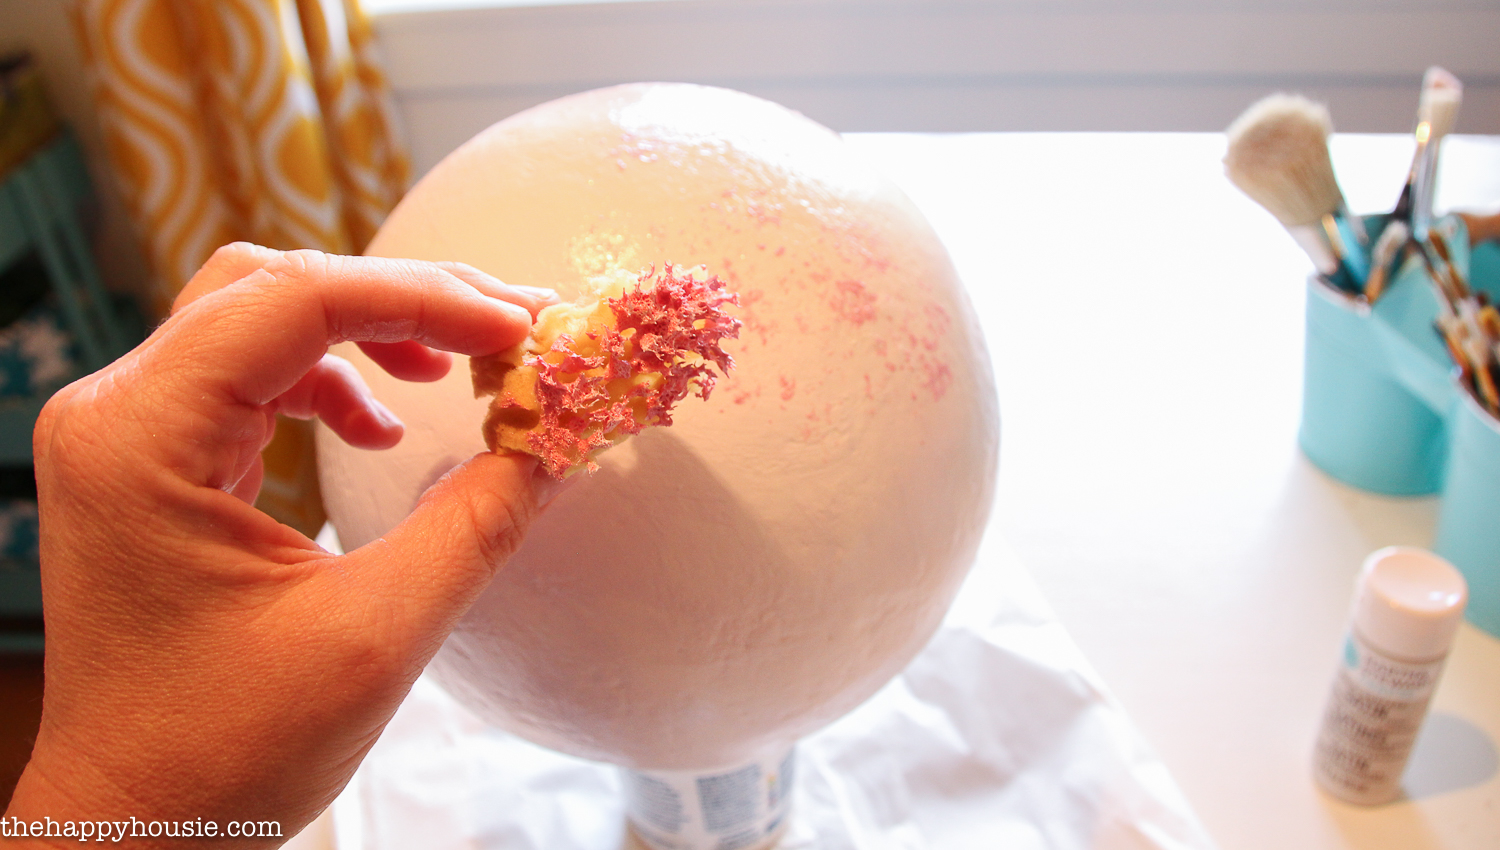 Using a sea sponge to speckle pink on the sphere.